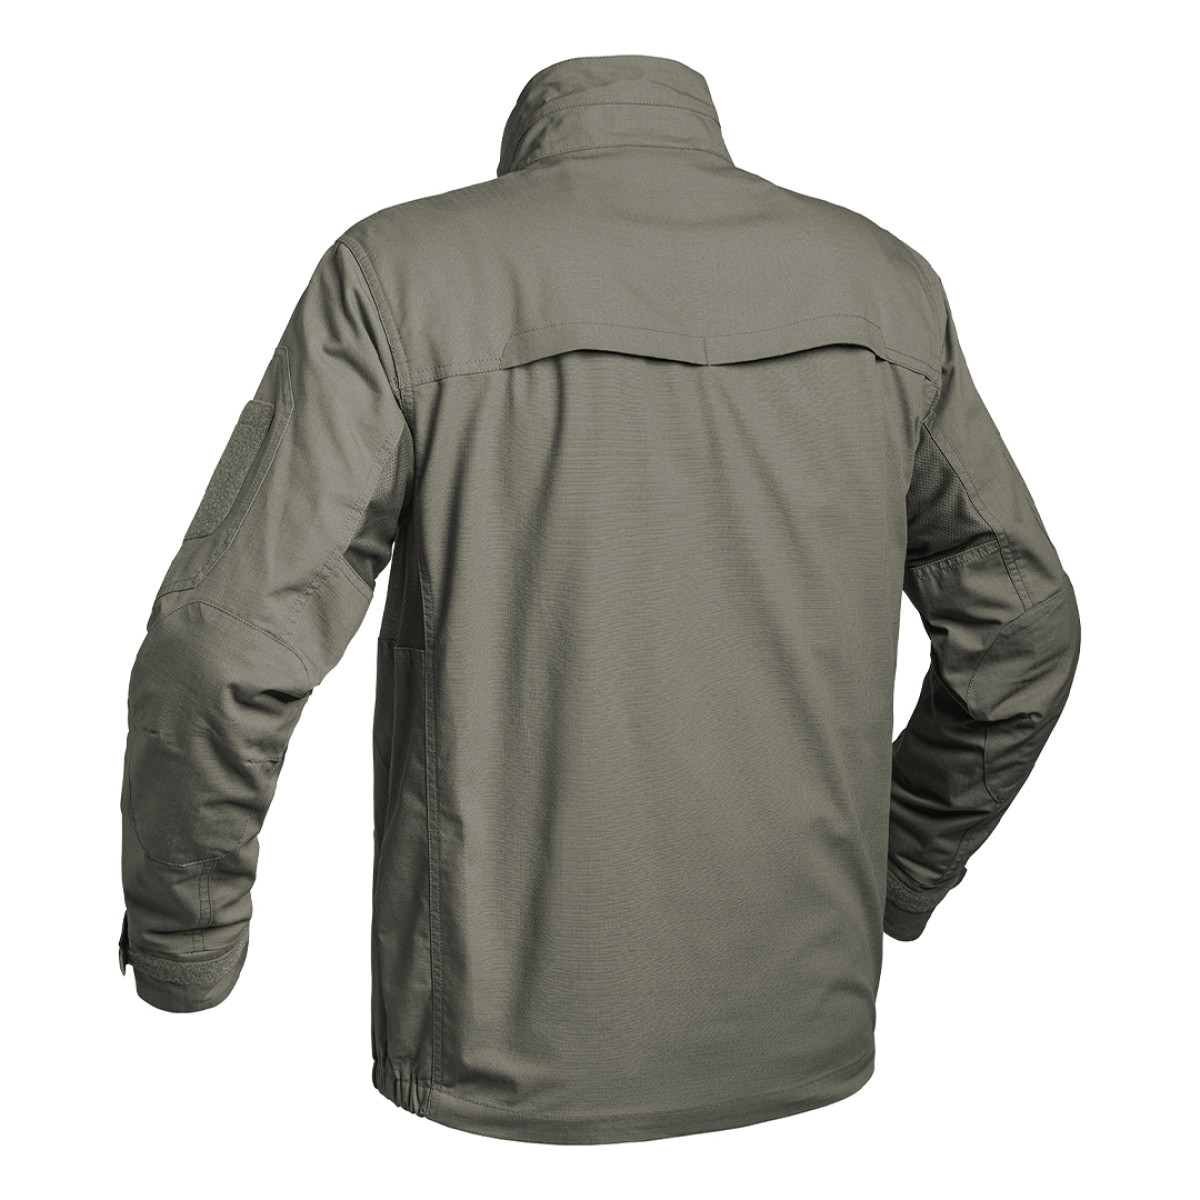 Cagoule Militaire Vert ou Tan A10 Equipment Thermo Performer 0°/+10° - Pro  Army